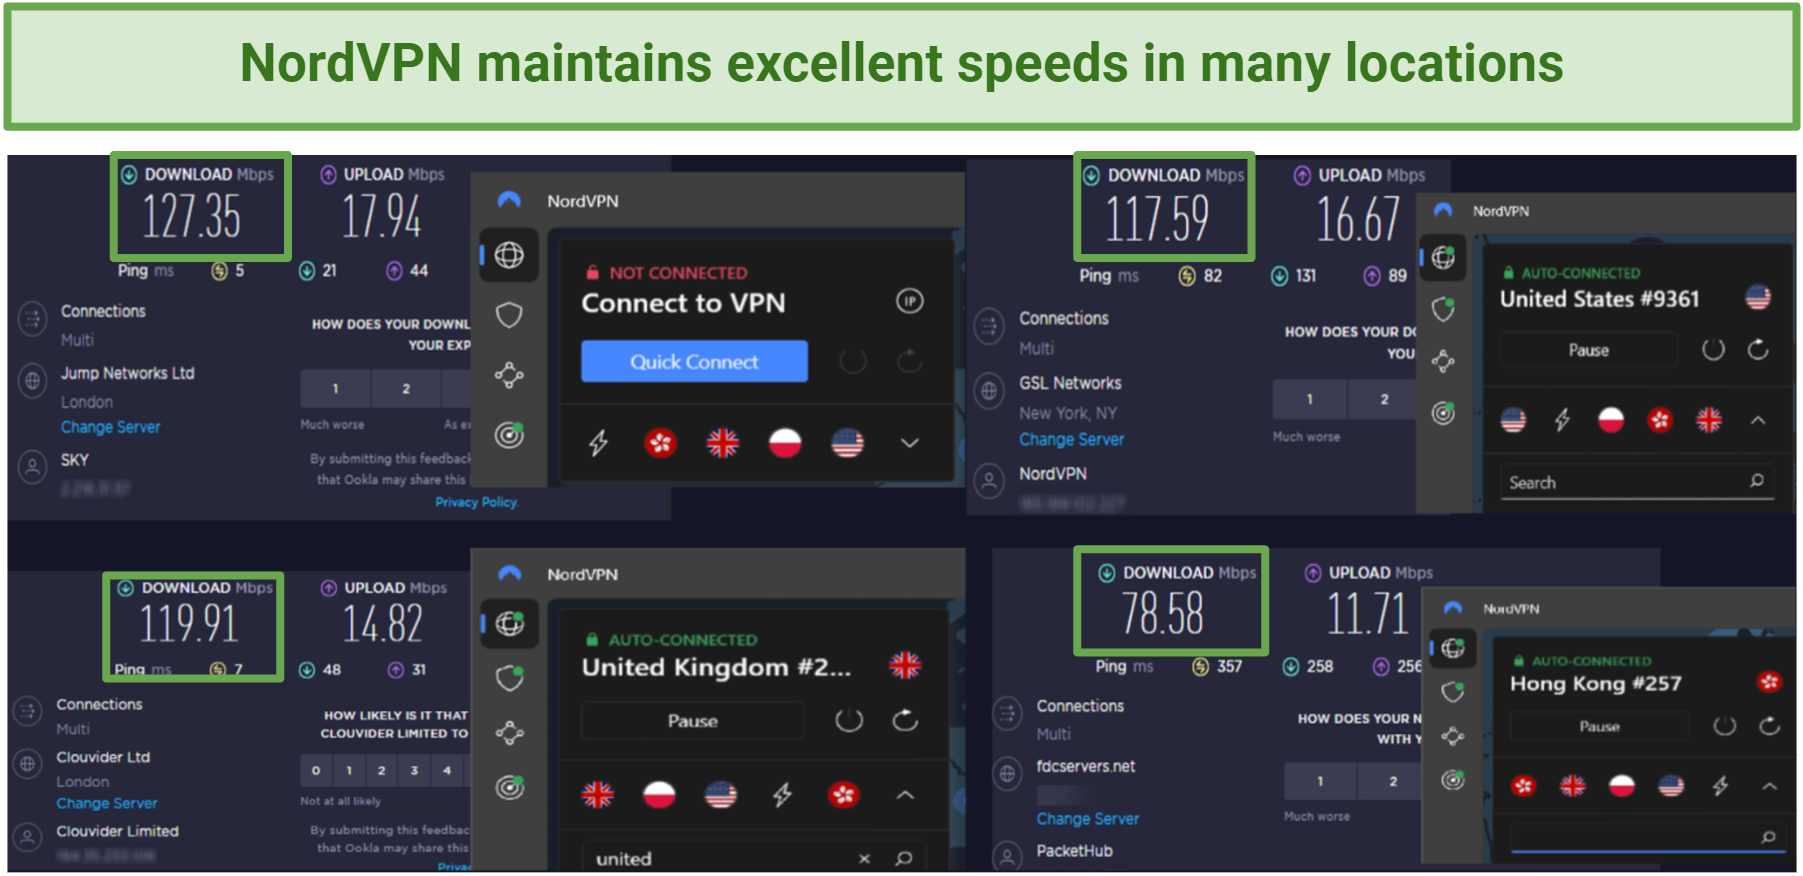 Pictures of NordVPN speed tests via Ookla for the US, UK, and Hong Kong